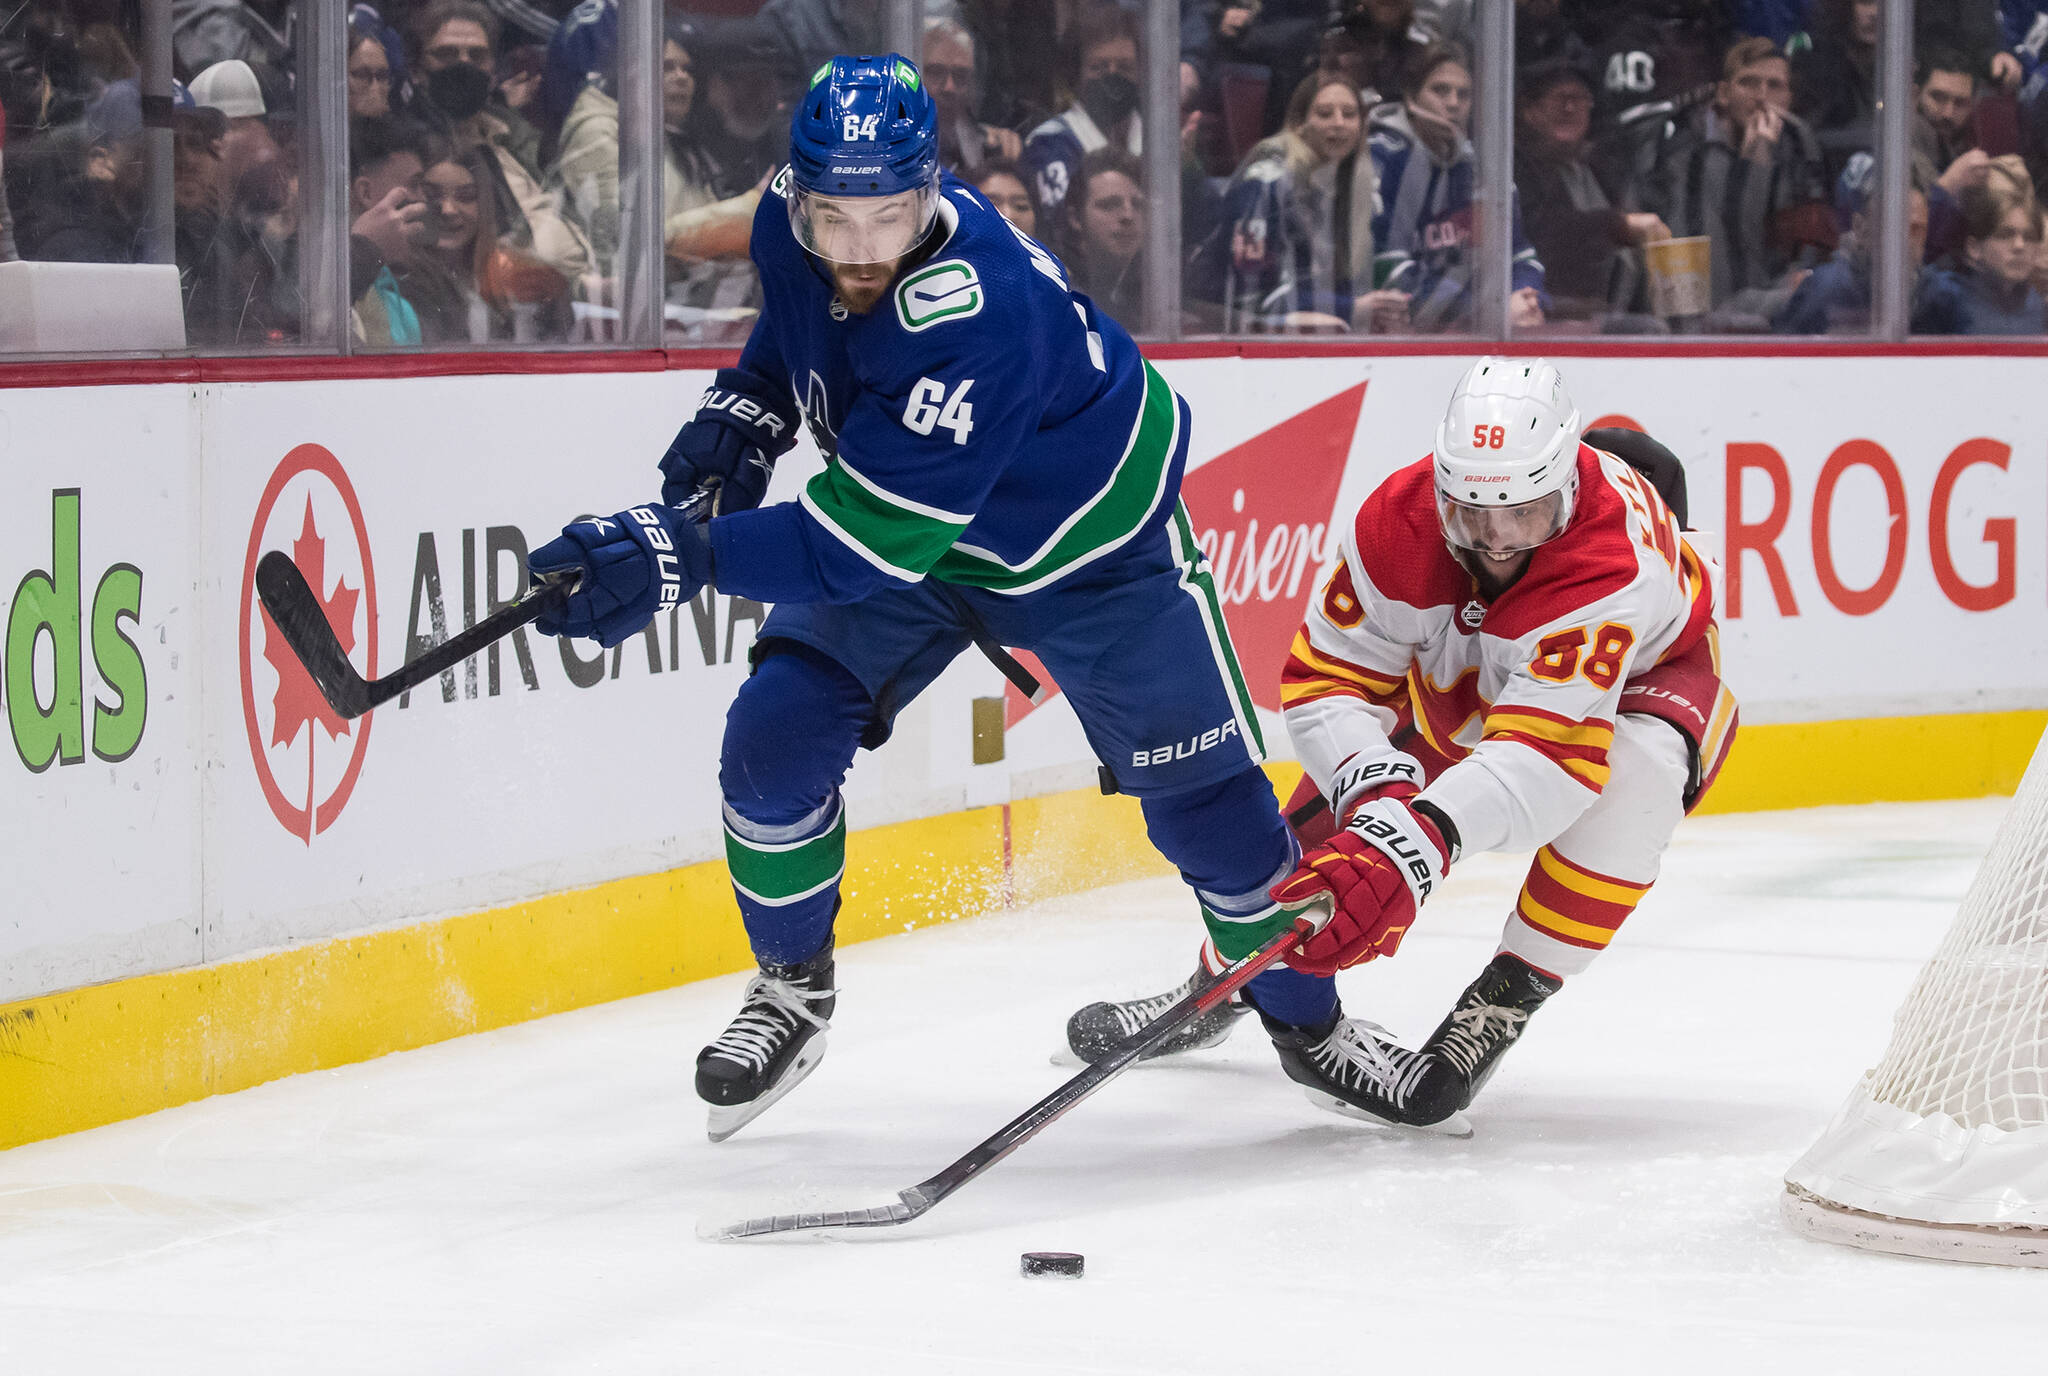 Calgary Flames’ Oliver Kylington, right, of Sweden, checks Vancouver Canucks’ Tyler Motte during the first period of an NHL hockey game in Vancouver, on Saturday, March 19, 2022. THE CANADIAN PRESS/Darryl Dyck